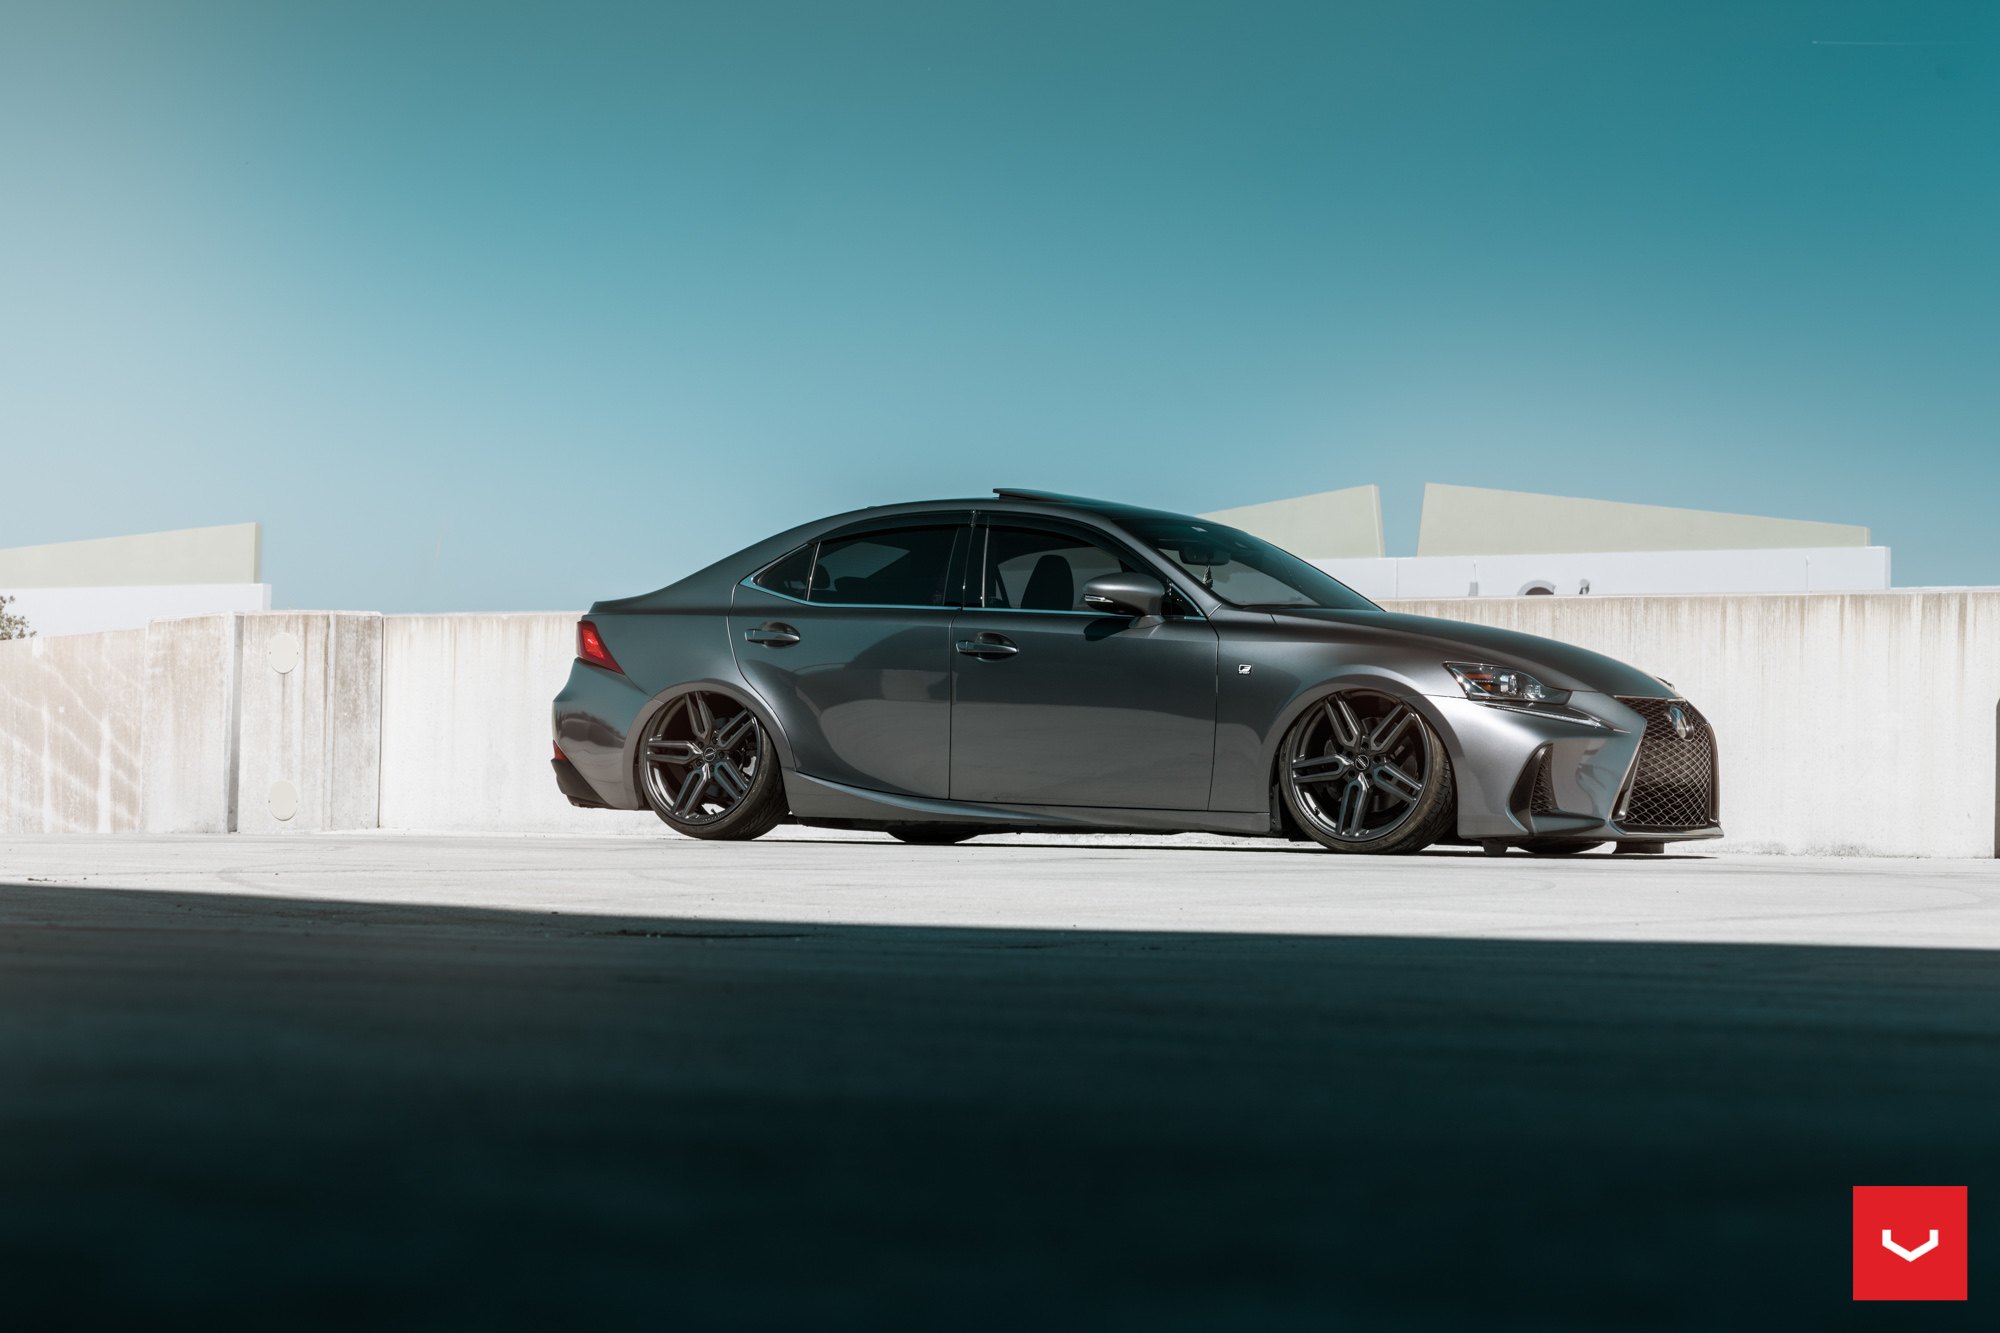 Aftermarket Side Skirts on Gray Lexus IS F - Photo by Vossen